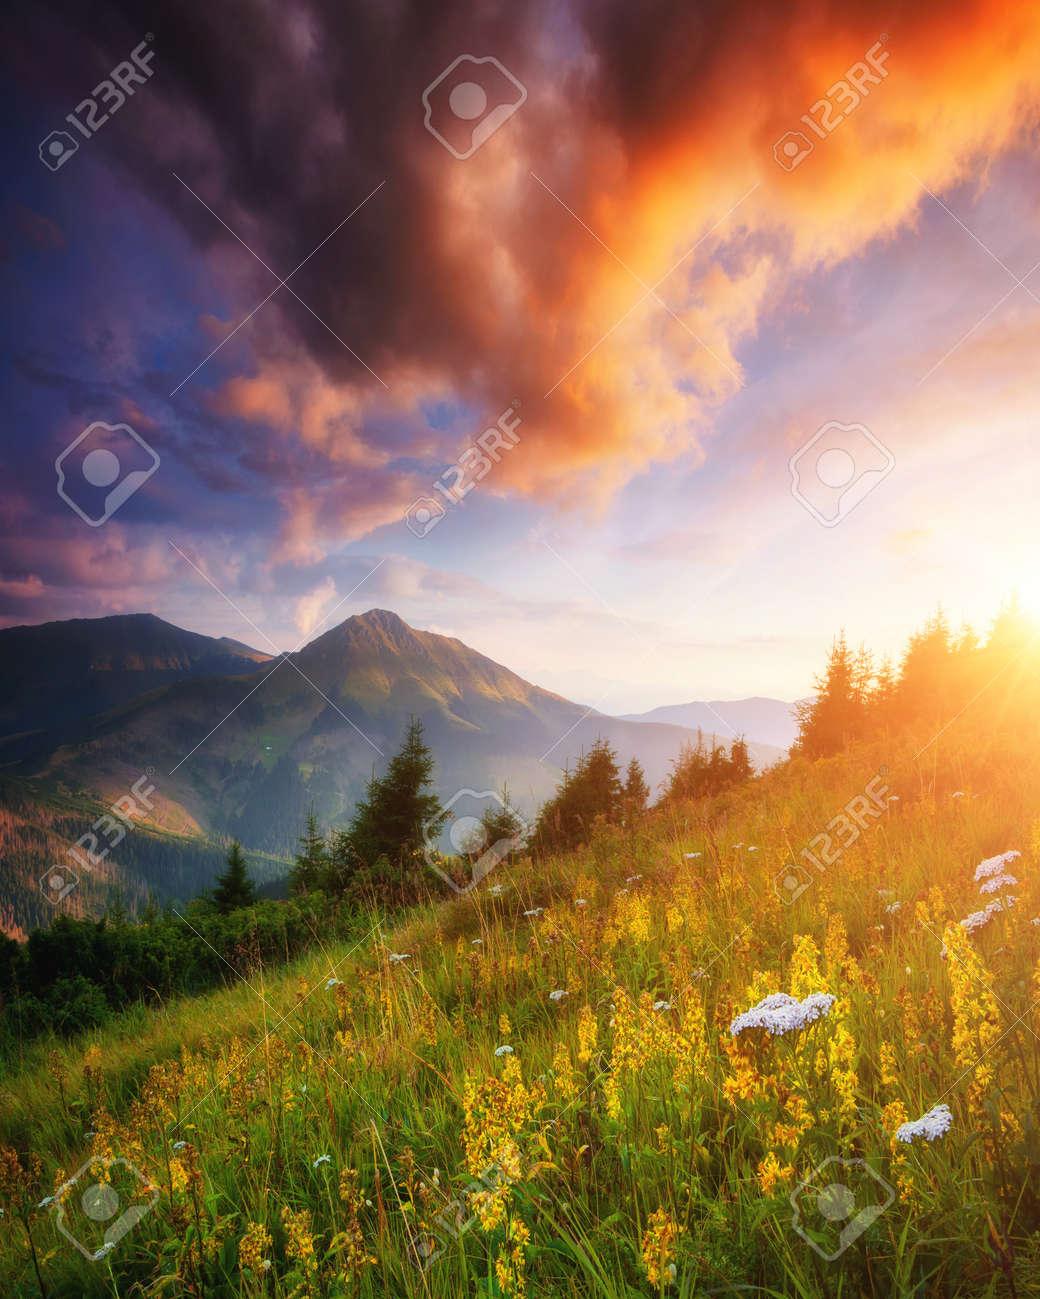 Picturesque Sunset In The Summer Mountains Location Place Of